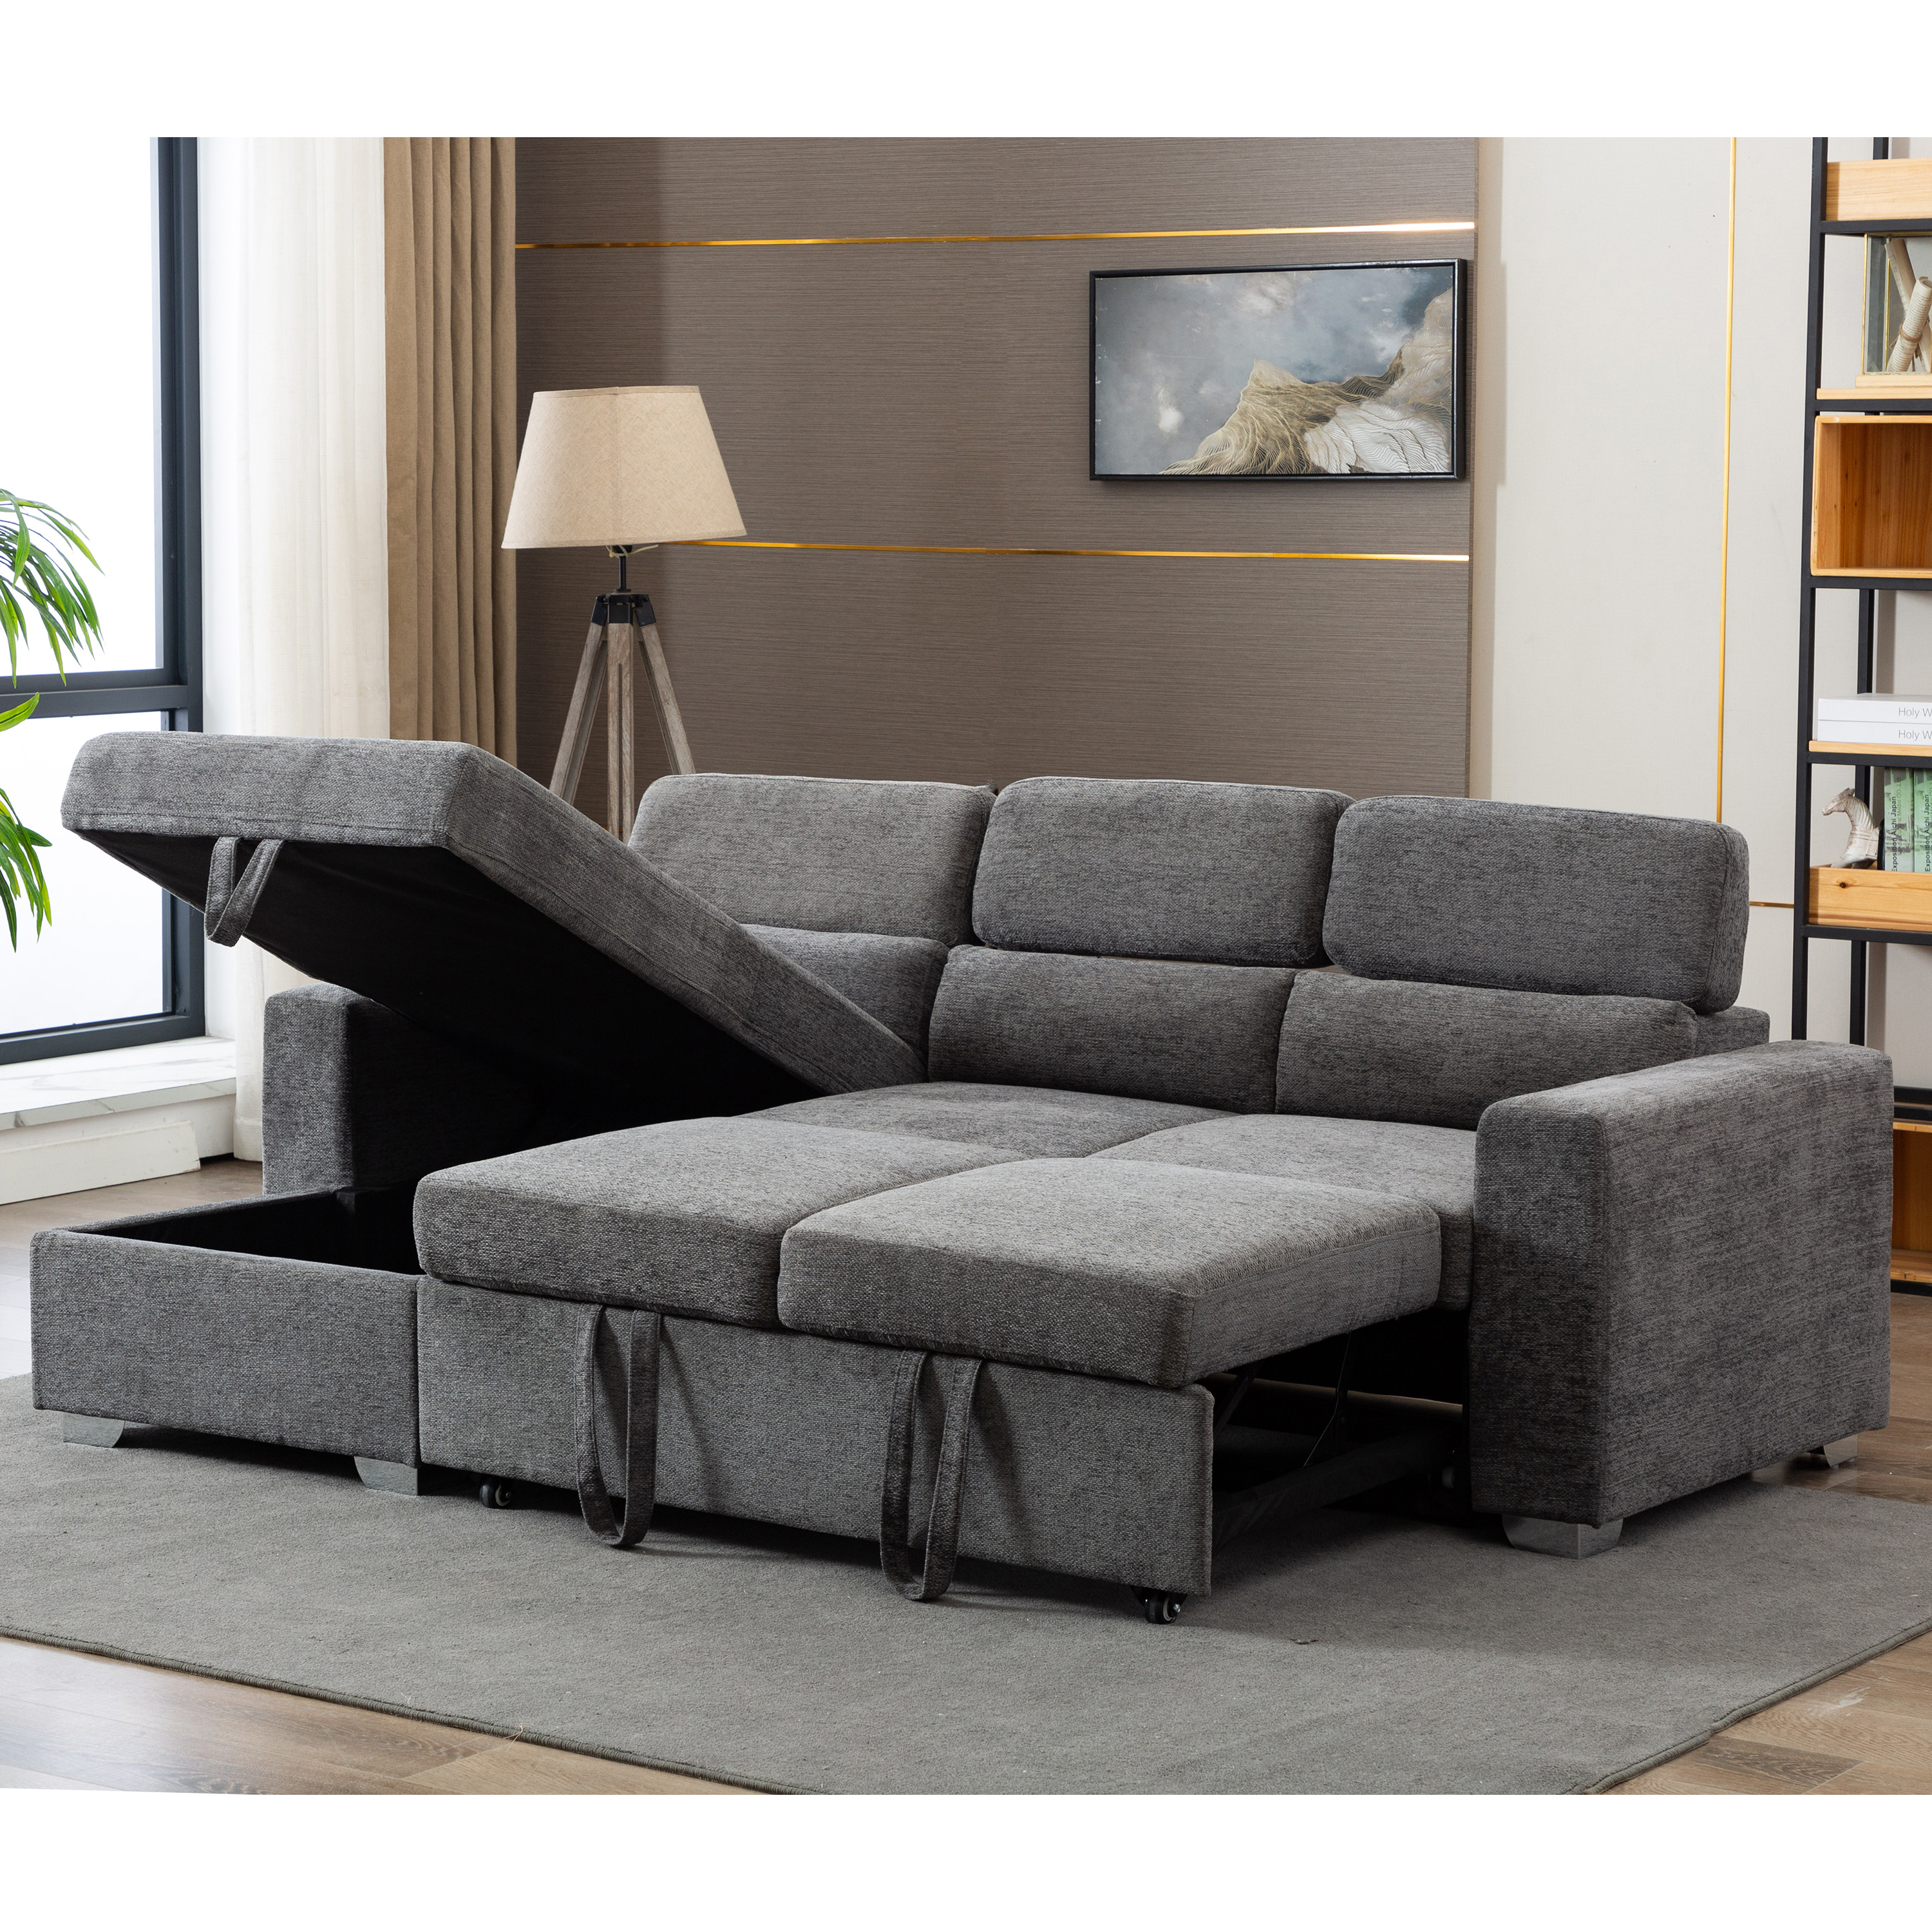 AC Pacific Modern Mid-Century Pullout Sectional Sleeper Sofa with Storage